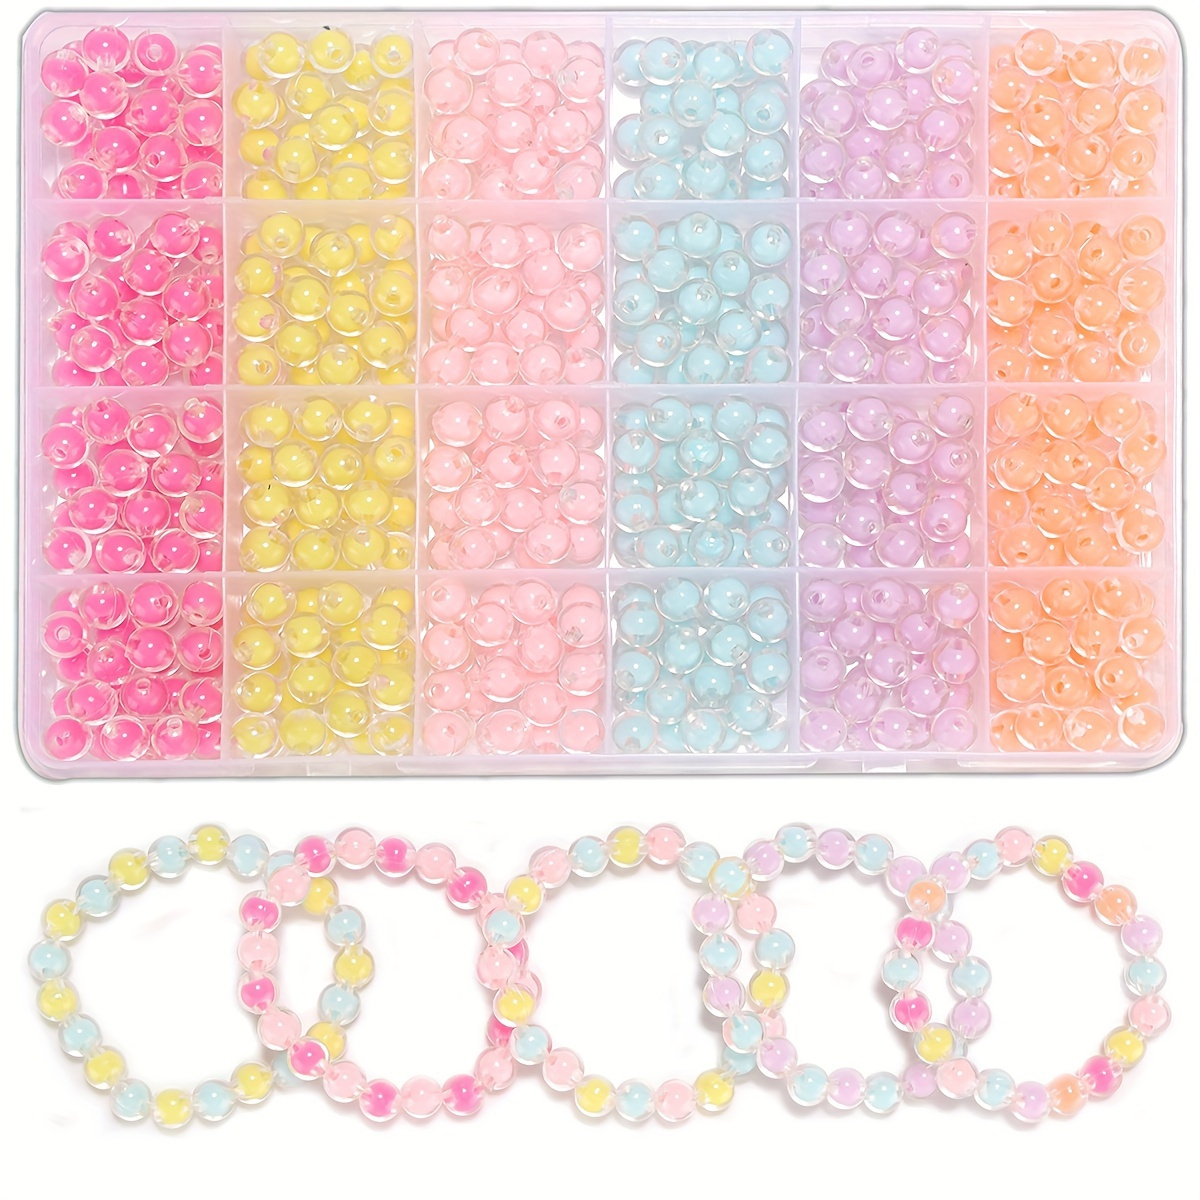 KOTHER 600PCS Glass Beads for Jewelry Making, 8mm DIY Glass Gemstone Beads  Bracelet Making Kit Healing Chakra Beads, 24 Color Round Gemstone Beads  Suitable for Beginners Glass Beads kits